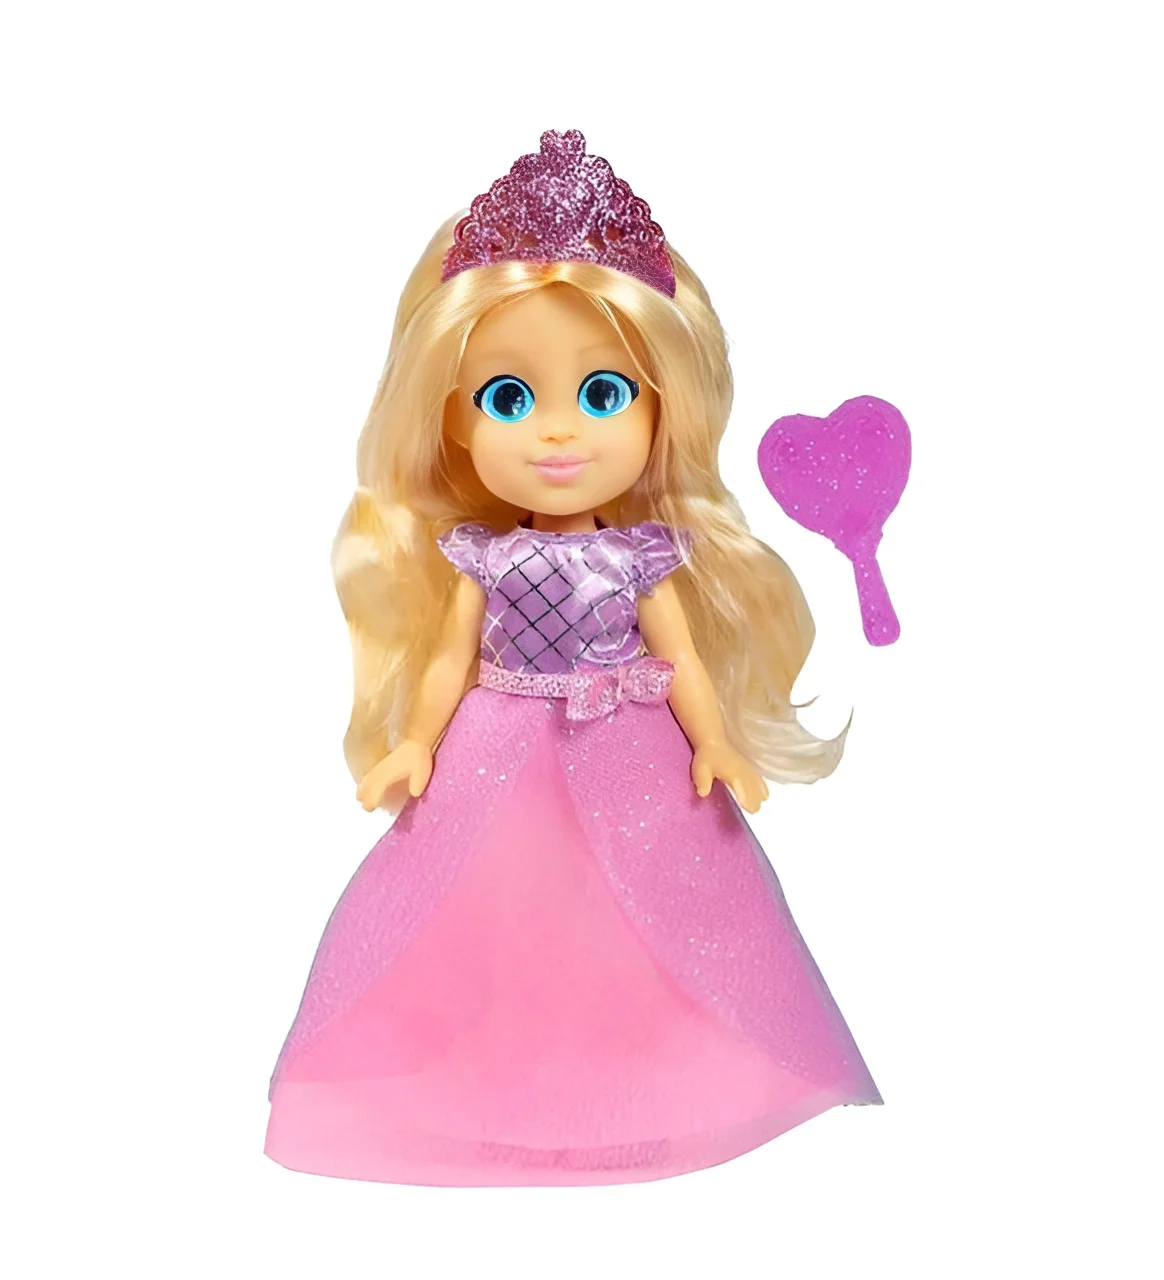 Love Diana Cloth Doll 15 Cm Toy Children Toy Mom & Kids Profession Groups Doctor Princess And Birthday Baby Fun Game diana thater the sympathetic imagination